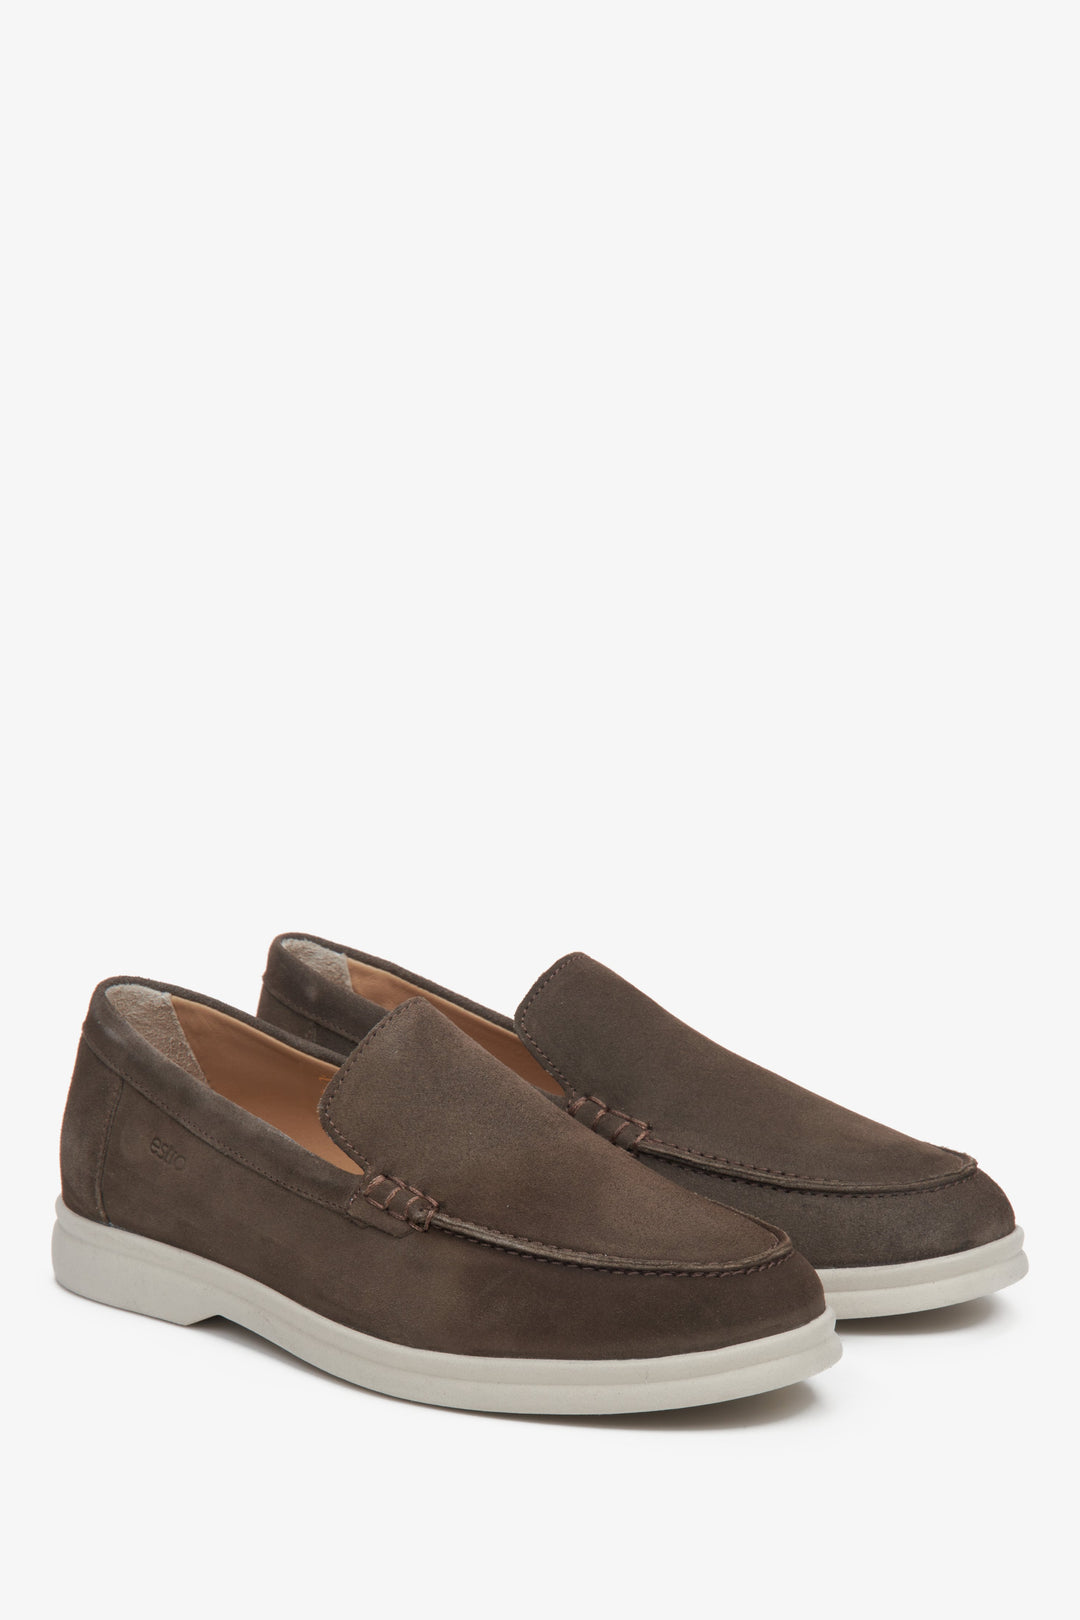 Women's velour loafers in saddle brown by Estro - presentation of the sideline and white sole.